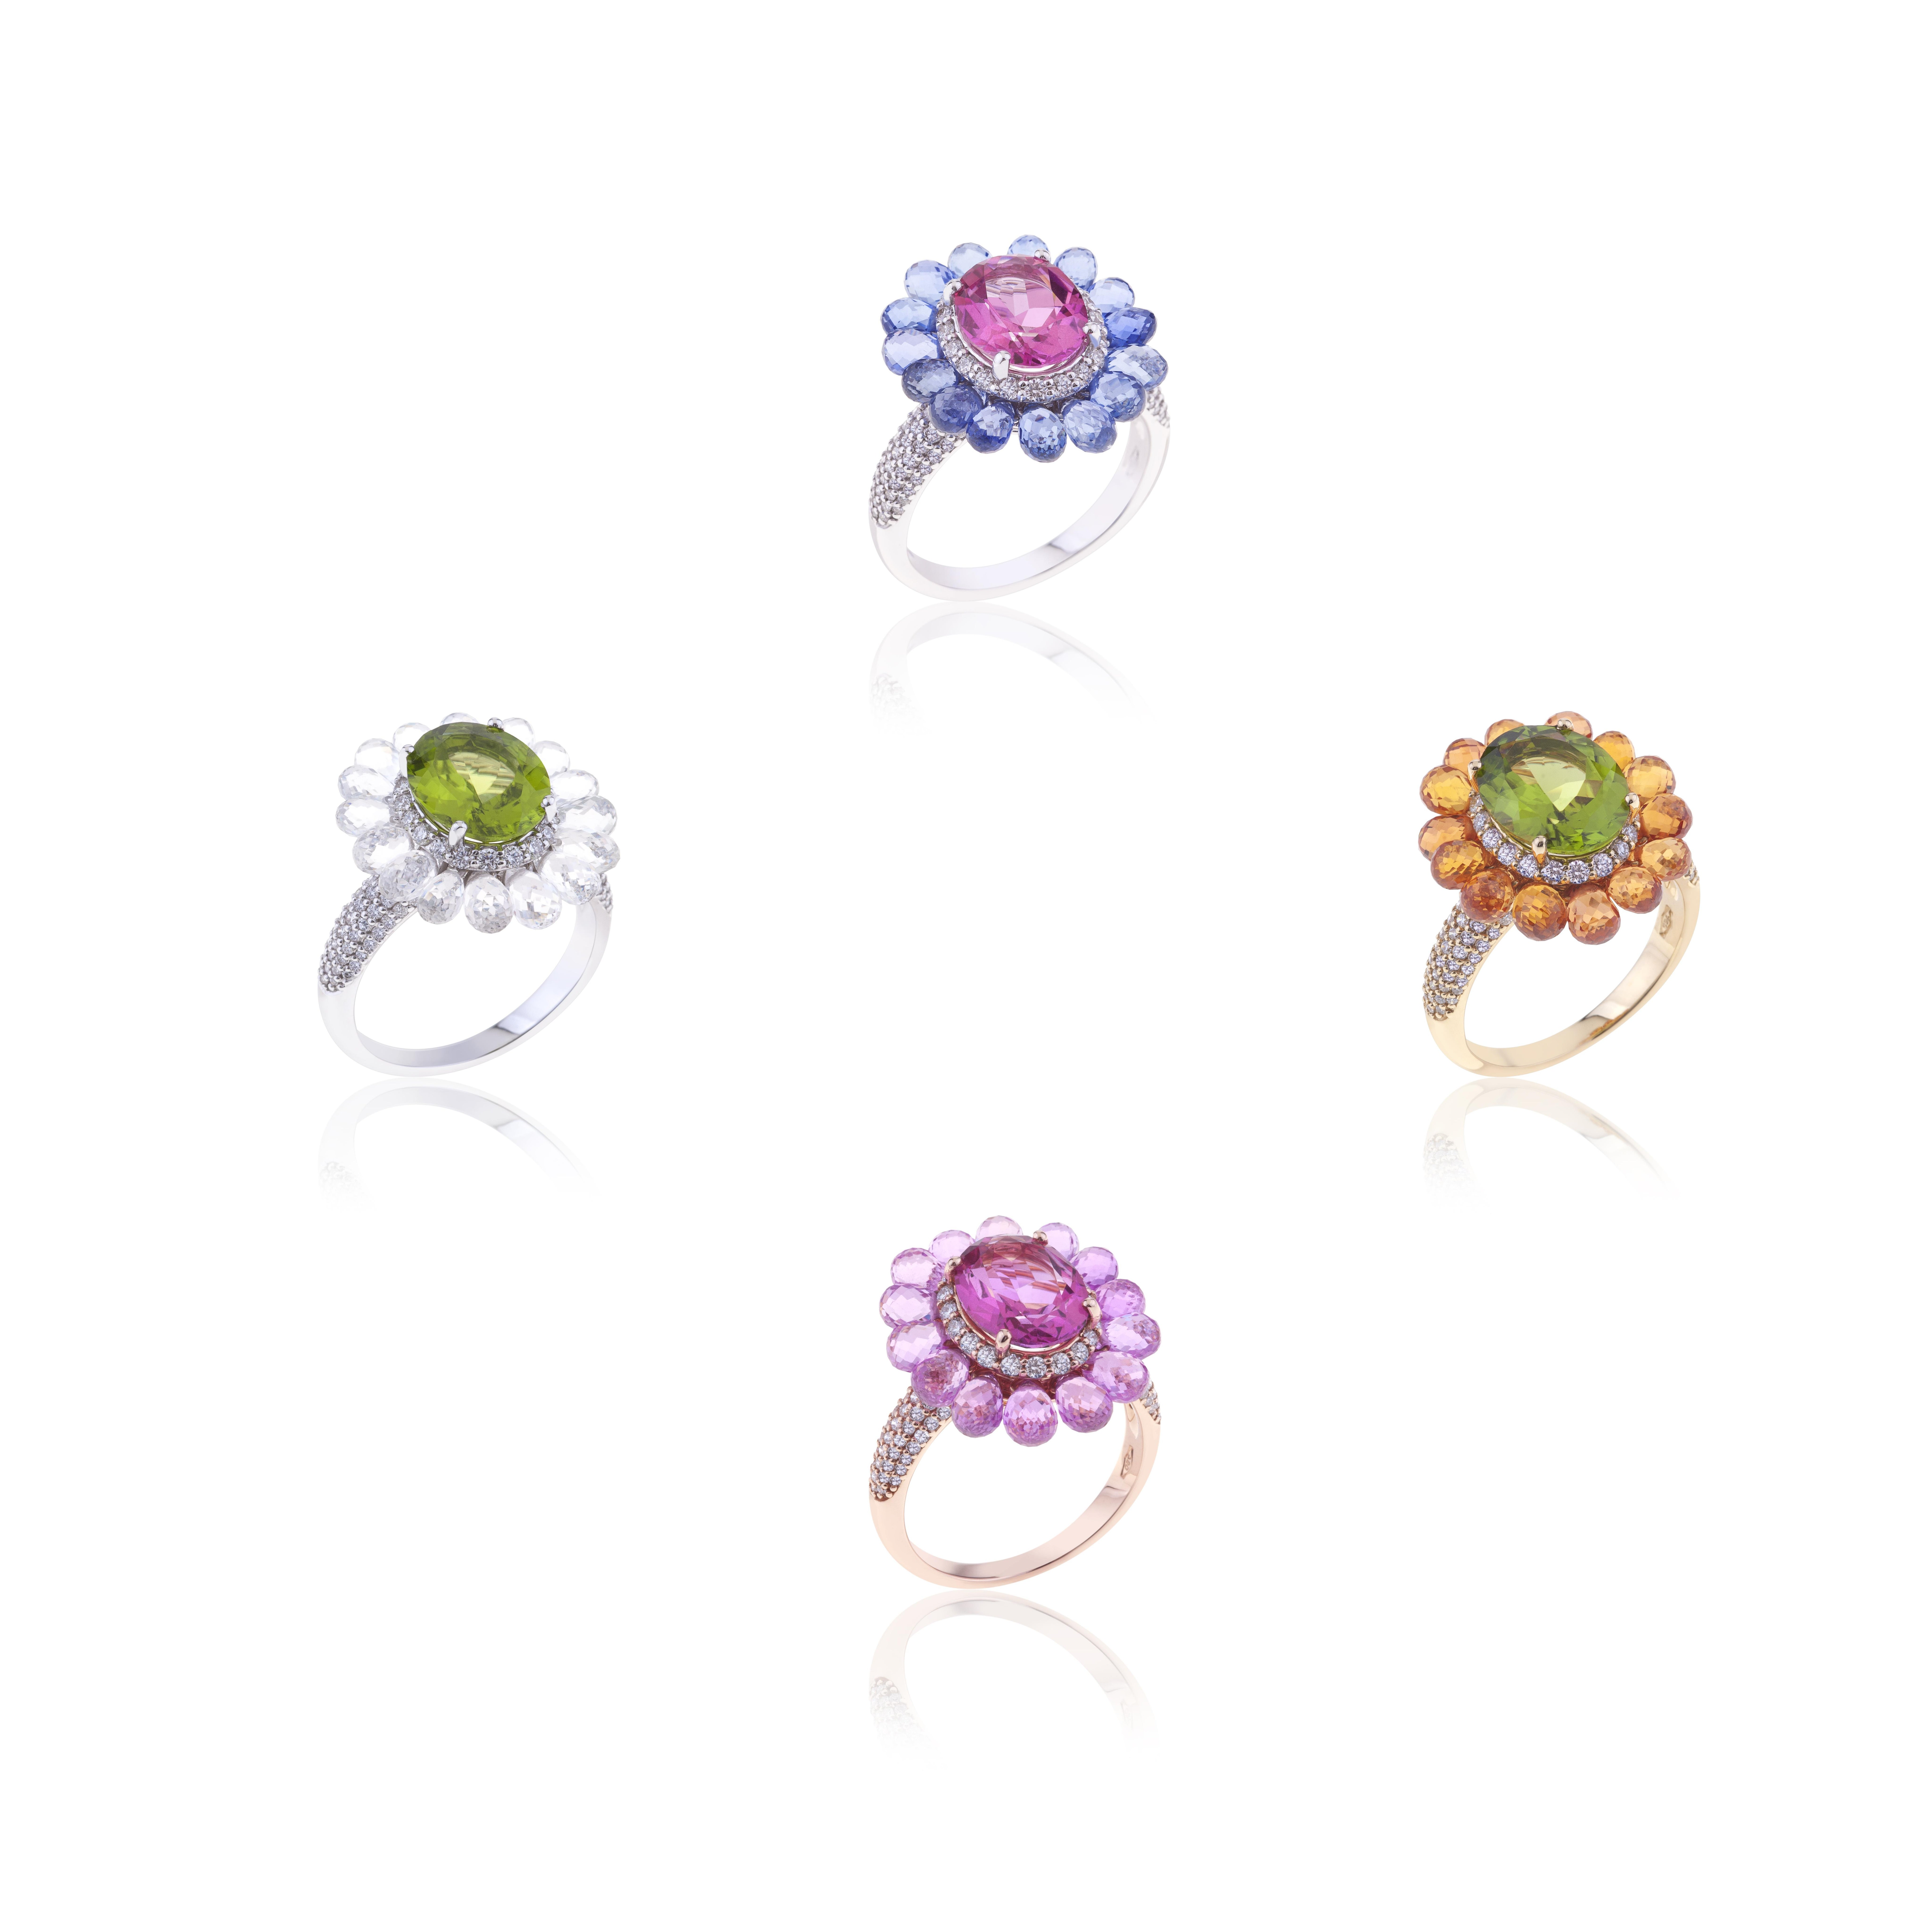 Flower Happy Ring 18kt White Gold With Oval Green Peridot, Pear White Sapphires and Diamonds.
This coloured ring transmit Happiness to ladies who will wear it, together with preciousness deriving from a circle of natural white sapphires.
Gold Weight